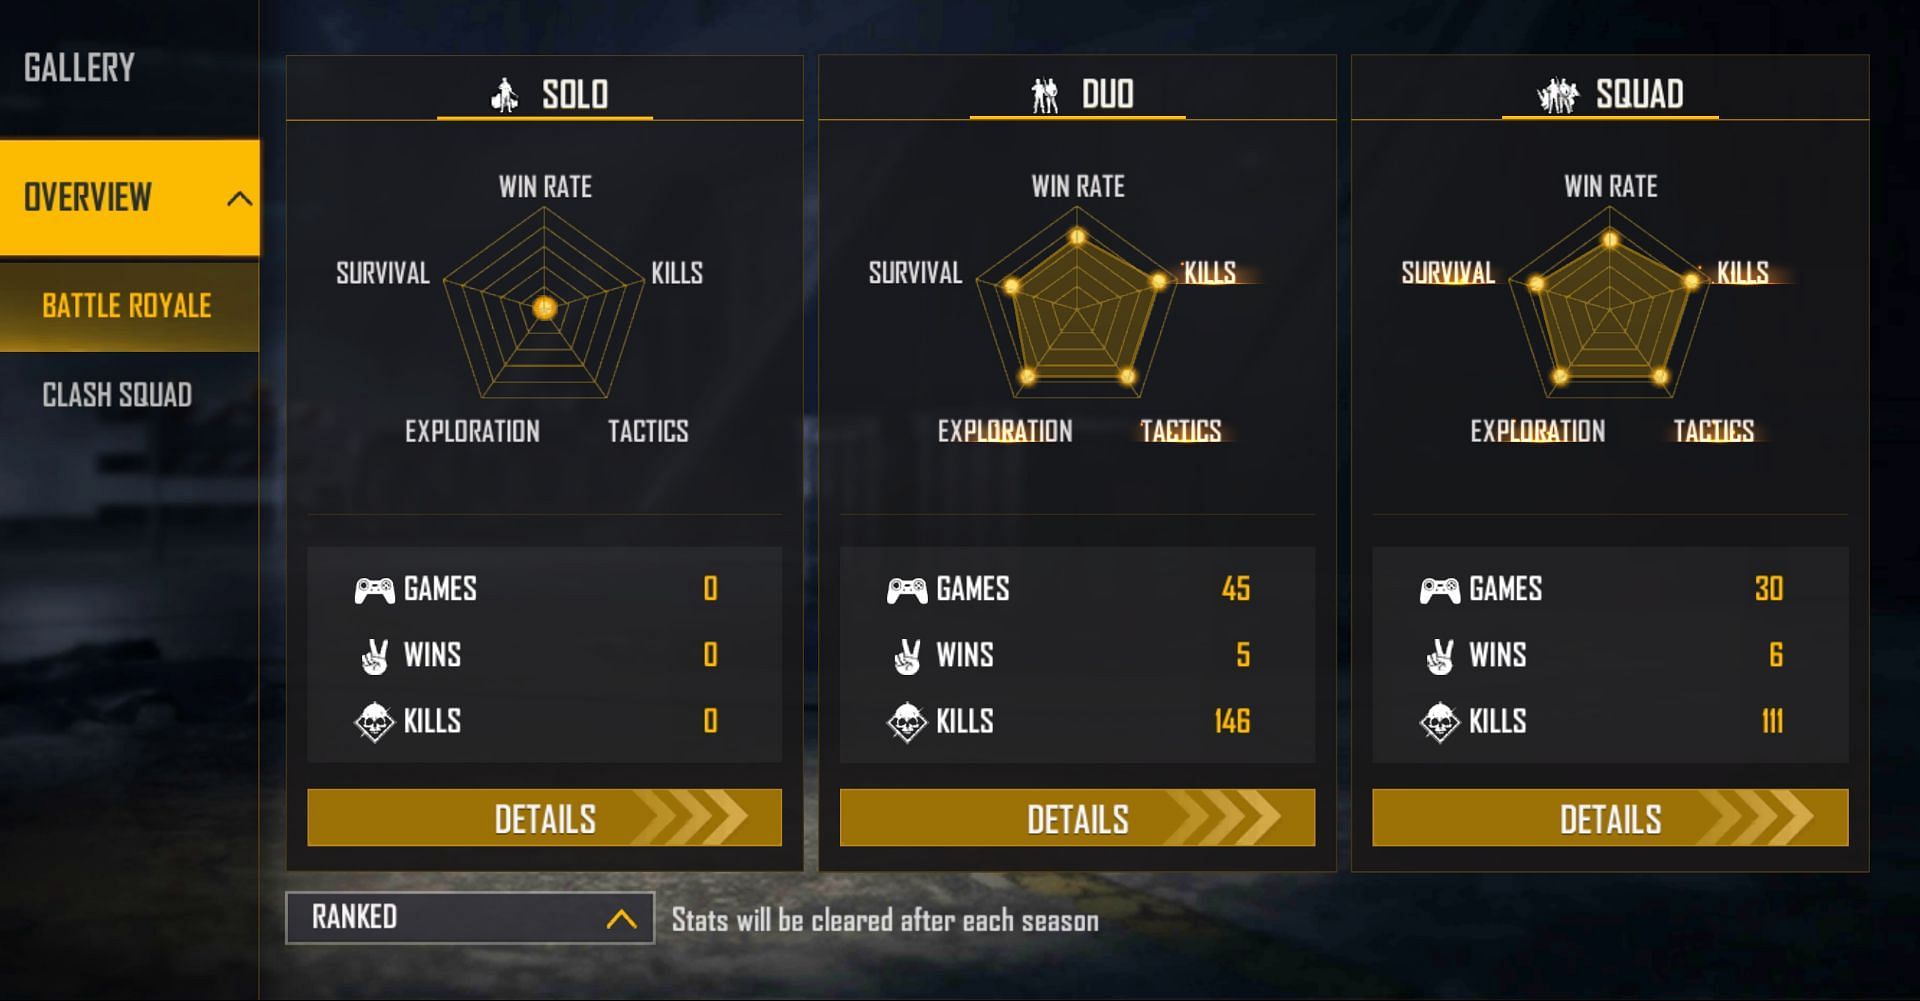 Pratham has not played solo matches (Image via Free Fire)